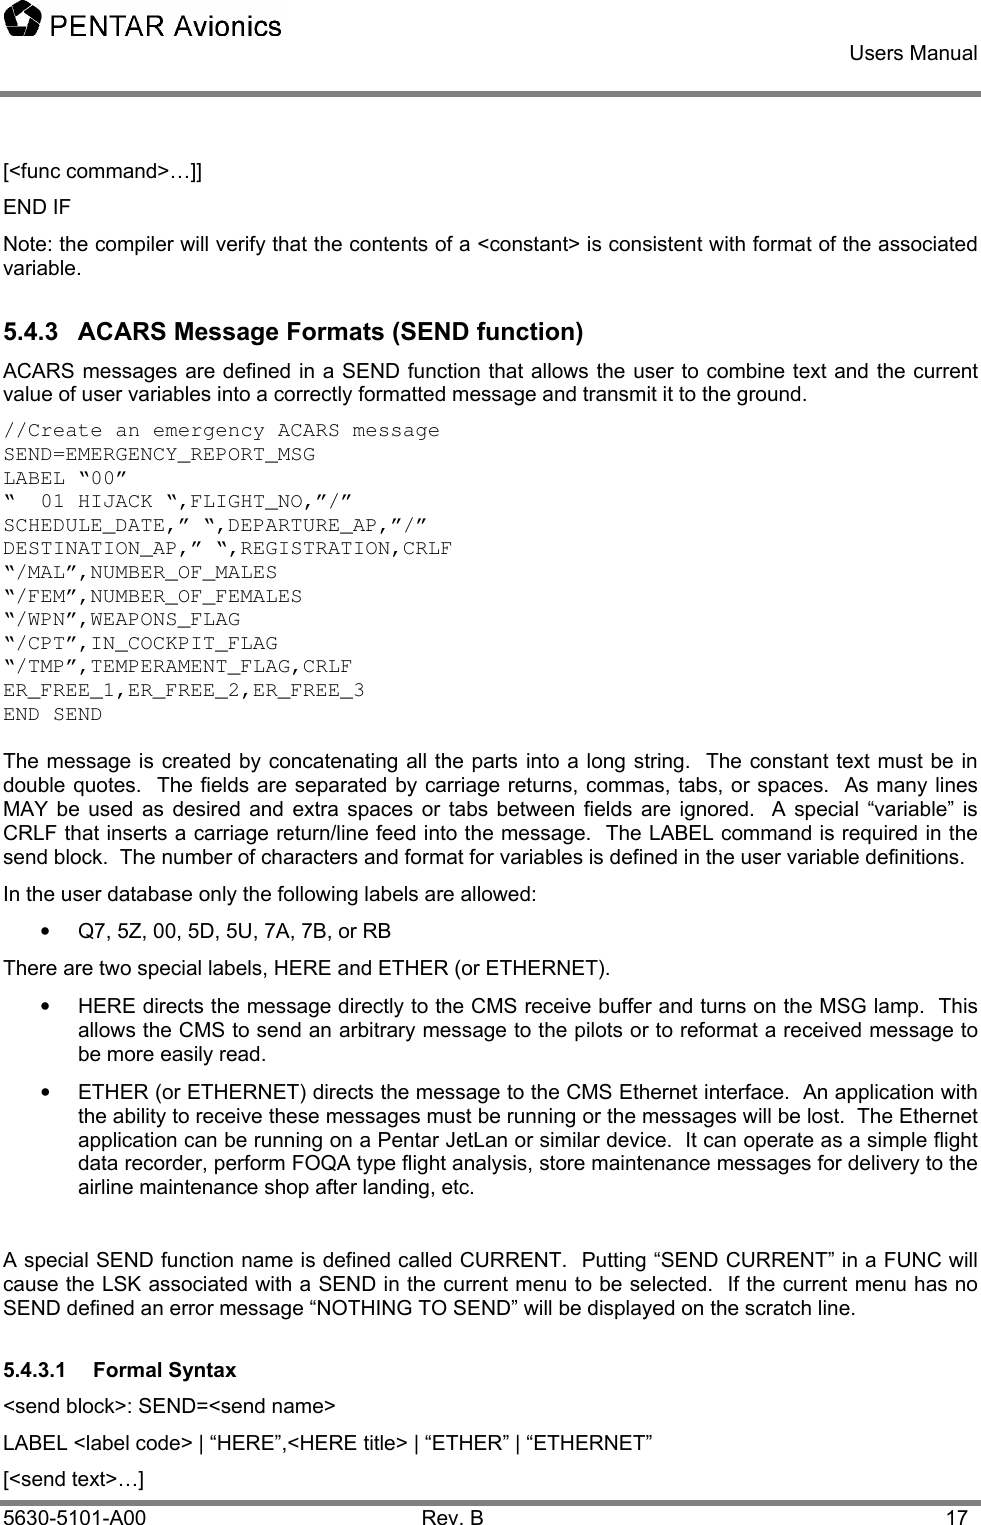    Users Manual    5630-5101-A00 Rev. B  17 [&lt;func command&gt;…]] END IF Note: the compiler will verify that the contents of a &lt;constant&gt; is consistent with format of the associated variable. 5.4.3  ACARS Message Formats (SEND function) ACARS messages are defined in a SEND function that allows the user to combine text and the current value of user variables into a correctly formatted message and transmit it to the ground. //Create an emergency ACARS message  SEND=EMERGENCY_REPORT_MSG LABEL “00” “  01 HIJACK “,FLIGHT_NO,”/” SCHEDULE_DATE,” “,DEPARTURE_AP,”/” DESTINATION_AP,” “,REGISTRATION,CRLF “/MAL”,NUMBER_OF_MALES “/FEM”,NUMBER_OF_FEMALES “/WPN”,WEAPONS_FLAG “/CPT”,IN_COCKPIT_FLAG “/TMP”,TEMPERAMENT_FLAG,CRLF ER_FREE_1,ER_FREE_2,ER_FREE_3 END SEND  The message is created by concatenating all the parts into a long string.  The constant text must be in double quotes.  The fields are separated by carriage returns, commas, tabs, or spaces.  As many lines MAY be used as desired and extra spaces or tabs between fields are ignored.  A special “variable” is CRLF that inserts a carriage return/line feed into the message.  The LABEL command is required in the send block.  The number of characters and format for variables is defined in the user variable definitions. In the user database only the following labels are allowed: •  Q7, 5Z, 00, 5D, 5U, 7A, 7B, or RB There are two special labels, HERE and ETHER (or ETHERNET).   •  HERE directs the message directly to the CMS receive buffer and turns on the MSG lamp.  This allows the CMS to send an arbitrary message to the pilots or to reformat a received message to be more easily read. •  ETHER (or ETHERNET) directs the message to the CMS Ethernet interface.  An application with the ability to receive these messages must be running or the messages will be lost.  The Ethernet application can be running on a Pentar JetLan or similar device.  It can operate as a simple flight data recorder, perform FOQA type flight analysis, store maintenance messages for delivery to the airline maintenance shop after landing, etc.   A special SEND function name is defined called CURRENT.  Putting “SEND CURRENT” in a FUNC will cause the LSK associated with a SEND in the current menu to be selected.  If the current menu has no SEND defined an error message “NOTHING TO SEND” will be displayed on the scratch line. 5.4.3.1 Formal Syntax &lt;send block&gt;: SEND=&lt;send name&gt; LABEL &lt;label code&gt; | “HERE”,&lt;HERE title&gt; | “ETHER” | “ETHERNET” [&lt;send text&gt;…] 